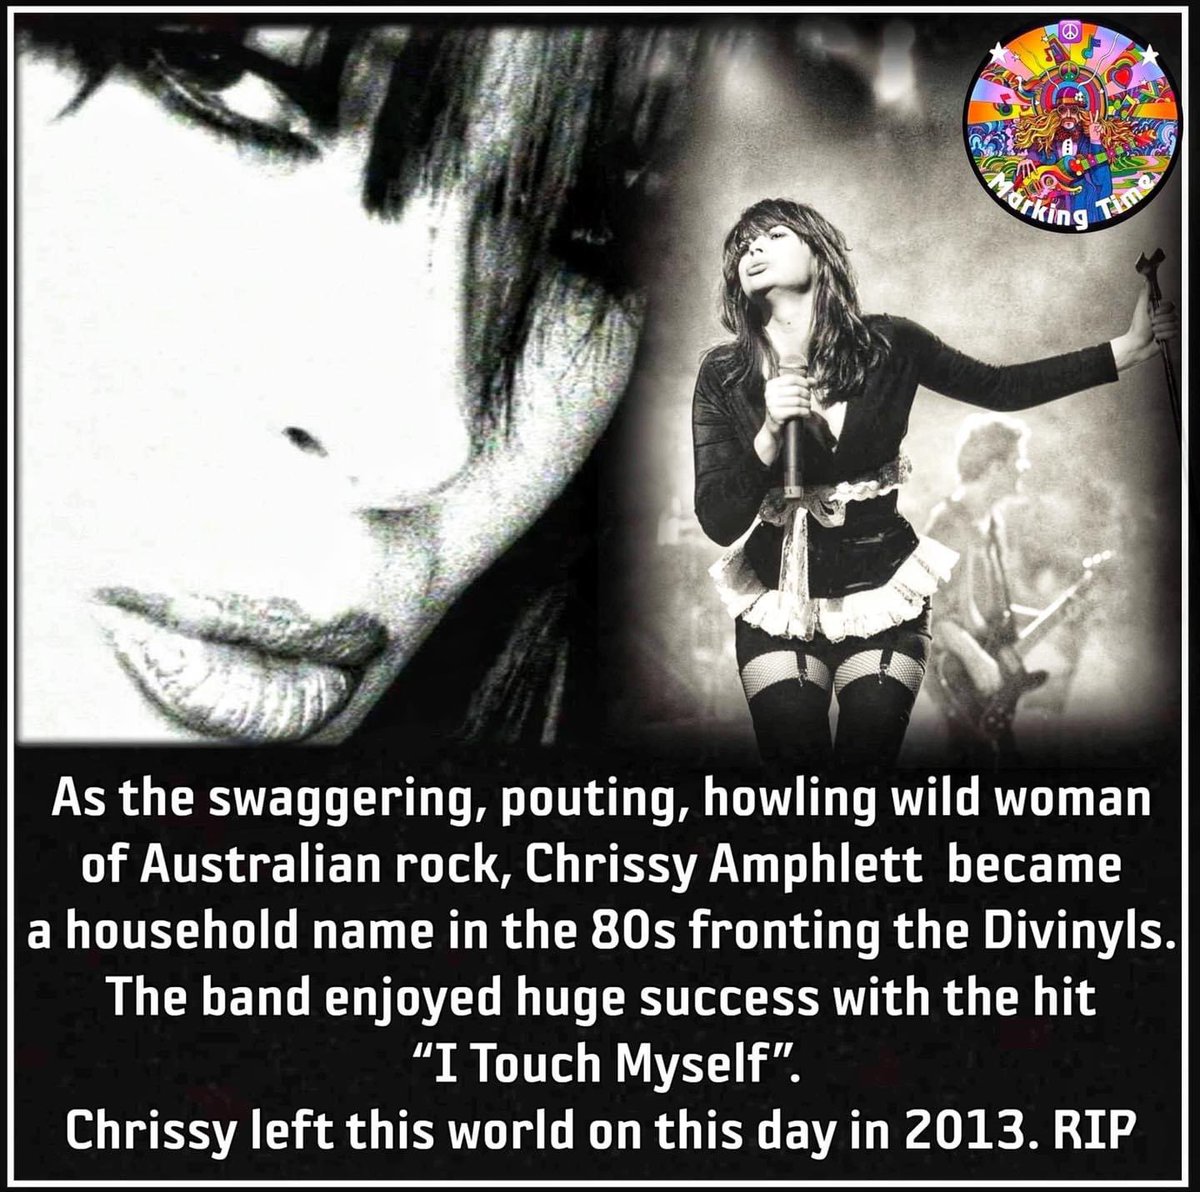 Nine years now passed. There will never be another Chrissy. @ChrissyAmphlett @DivinylsLover @OzDivinylsShow @Divinyls1 @CountdownABC